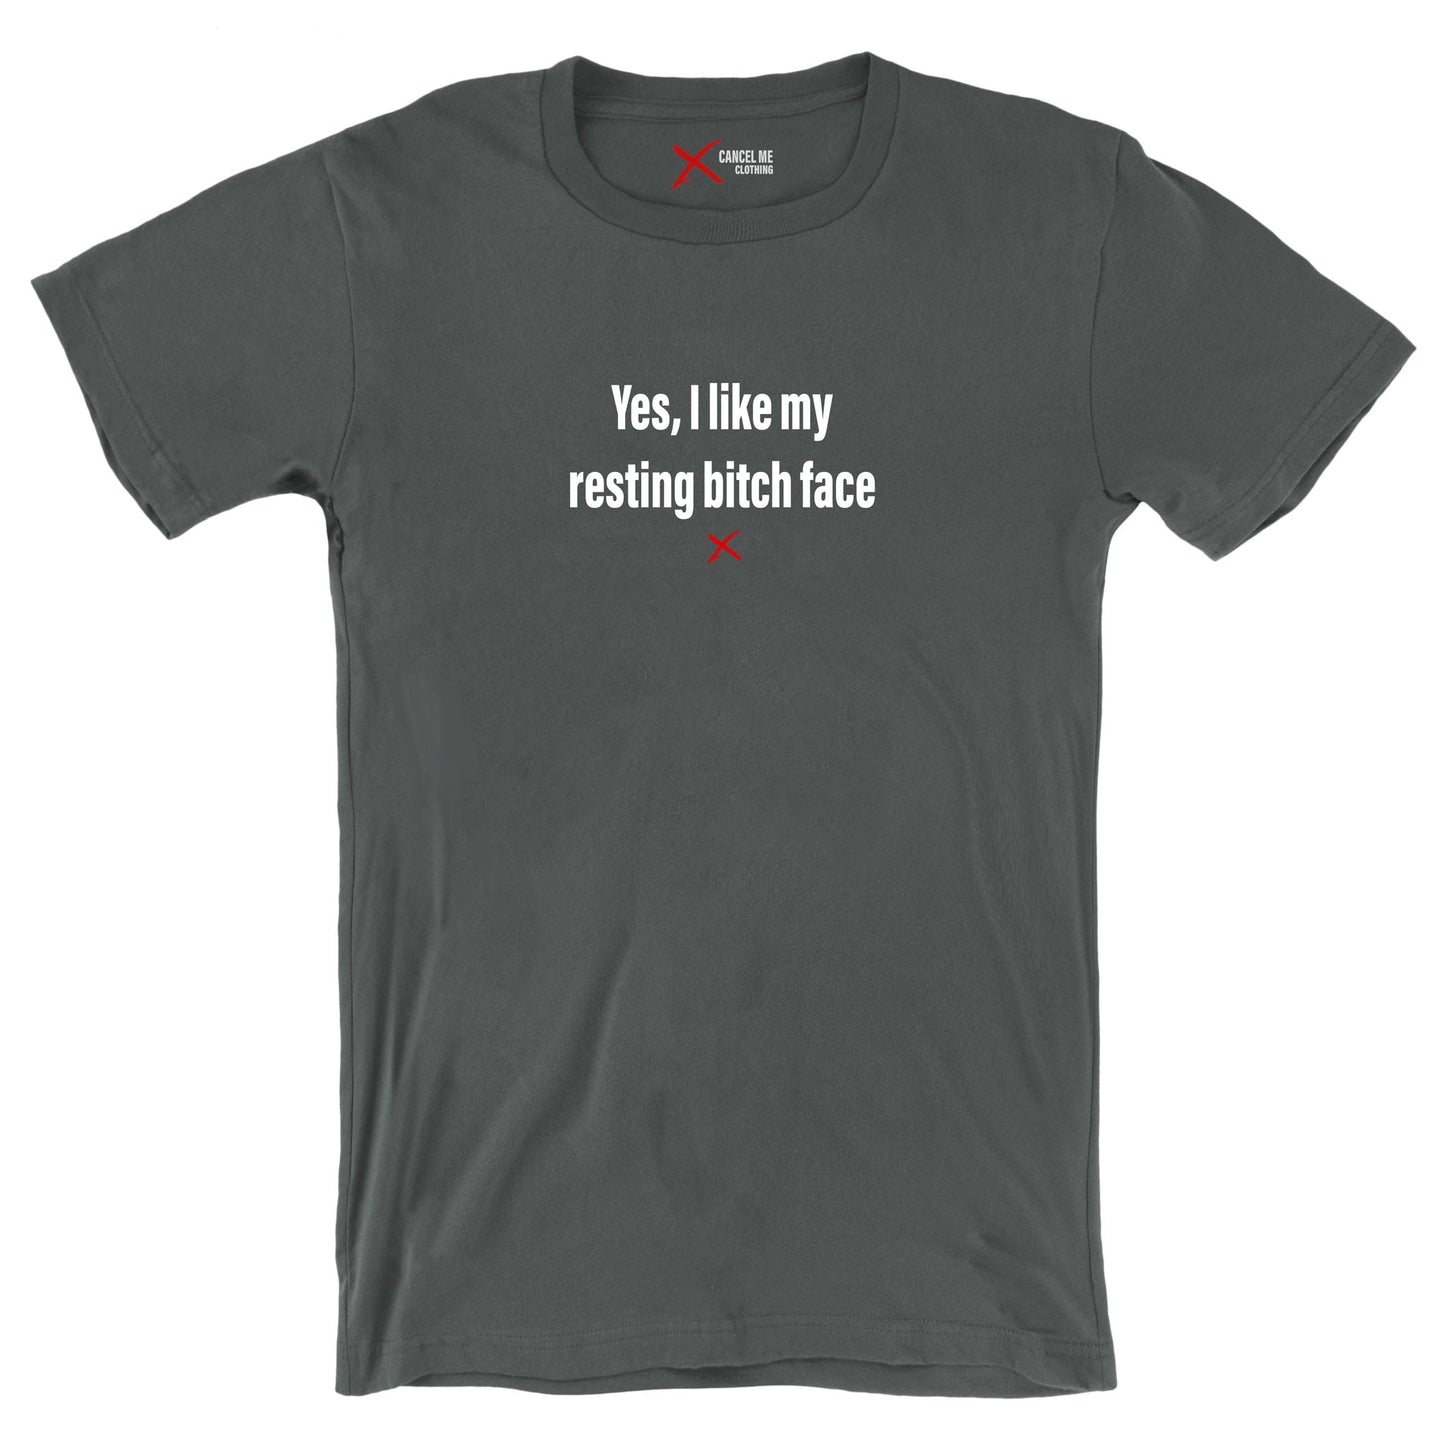 Yes, I like my resting bitch face - Shirt